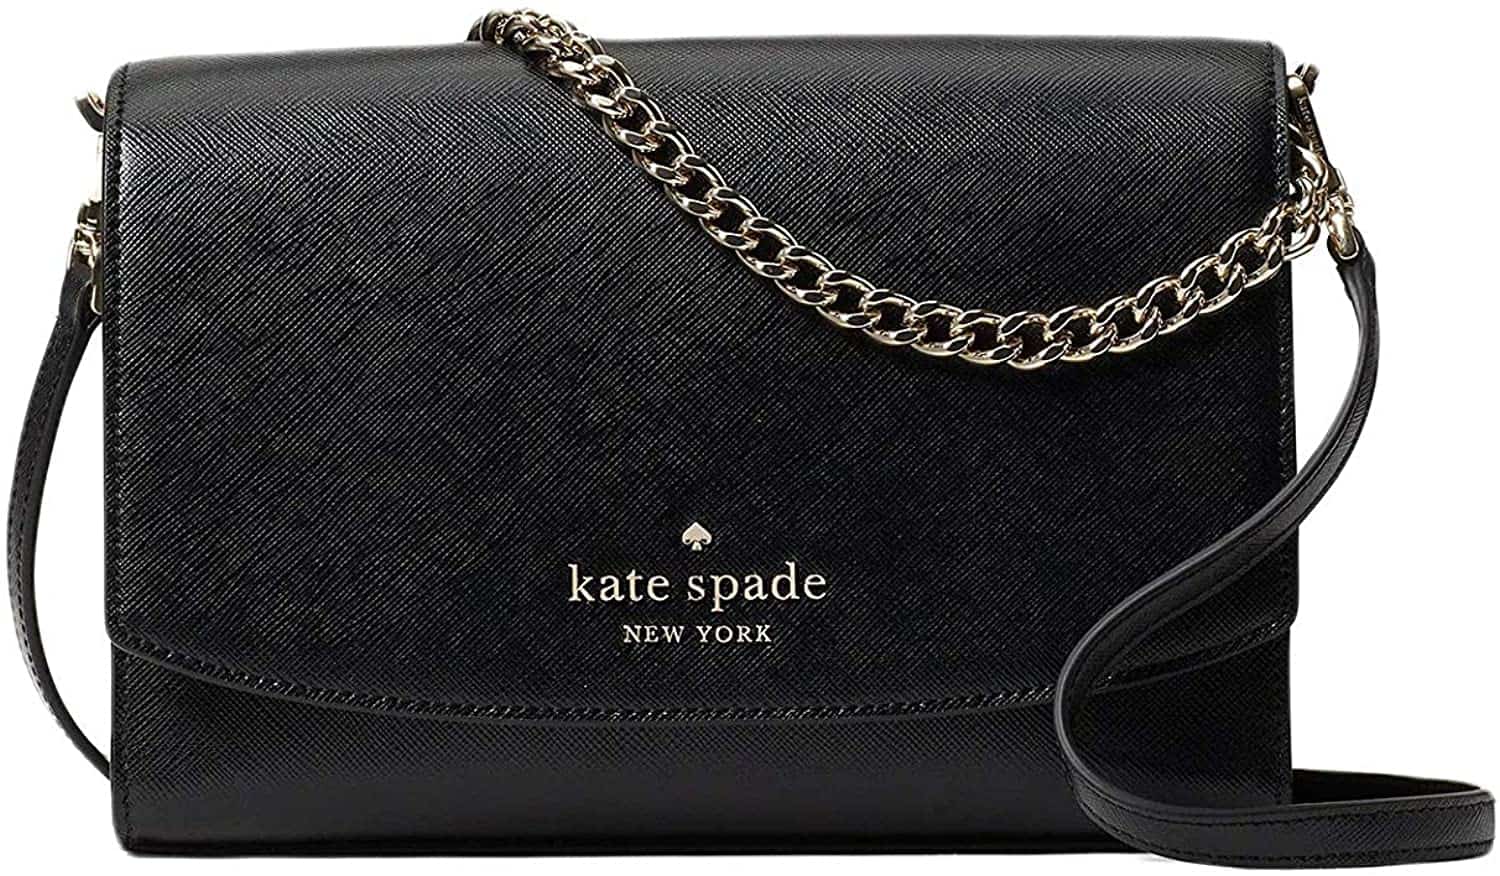 Tory Burch vs Kate Spade: Which Brand Is Better? - Jane Marvel